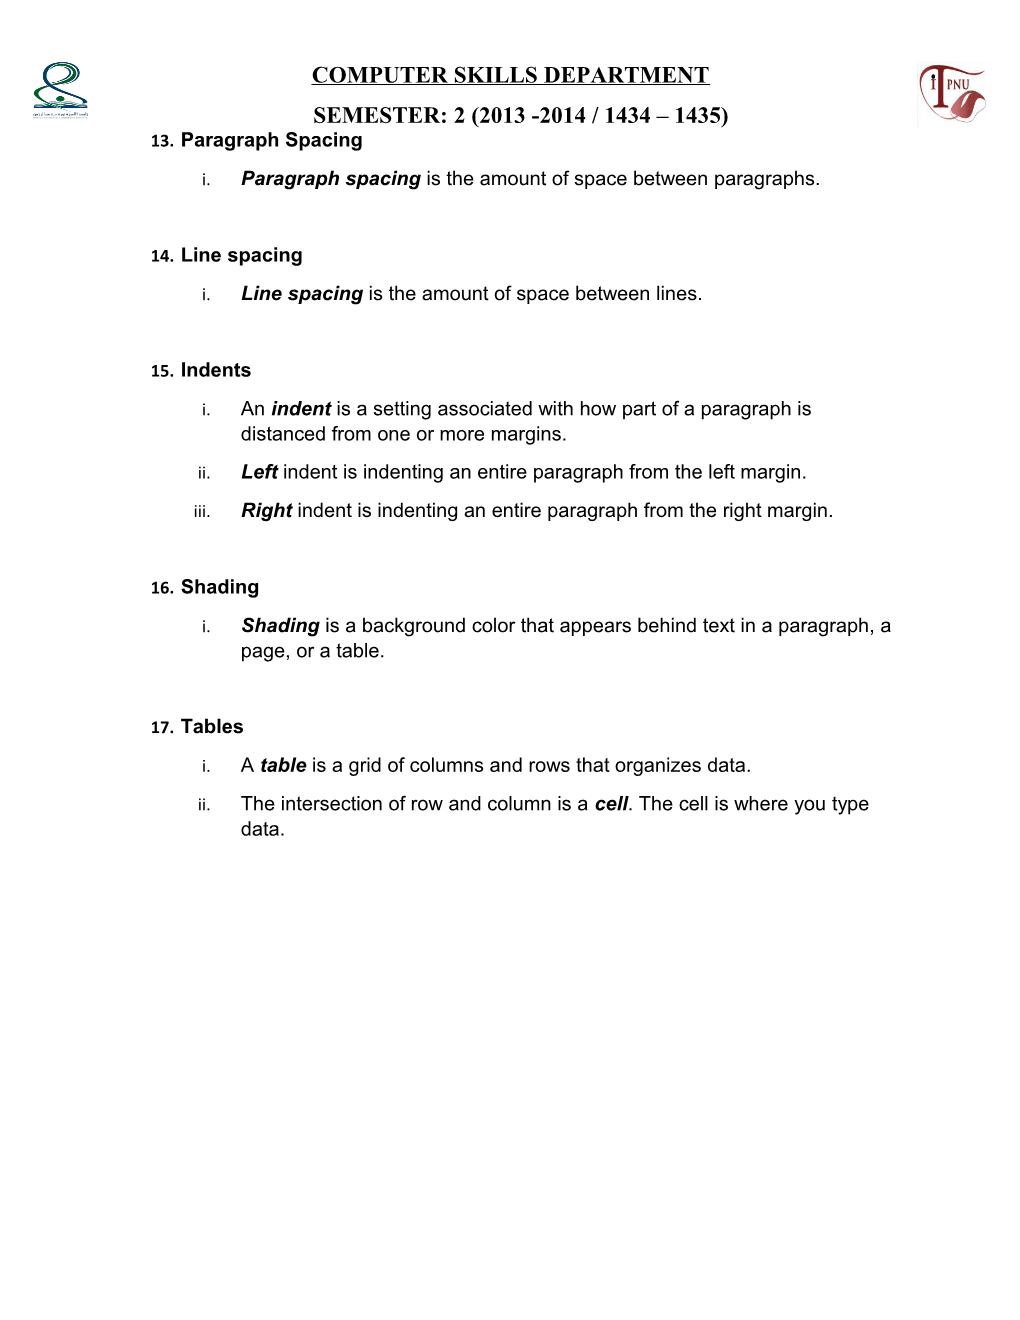 WORD THEORY HANDOUT (Based on SKYDRIVE)